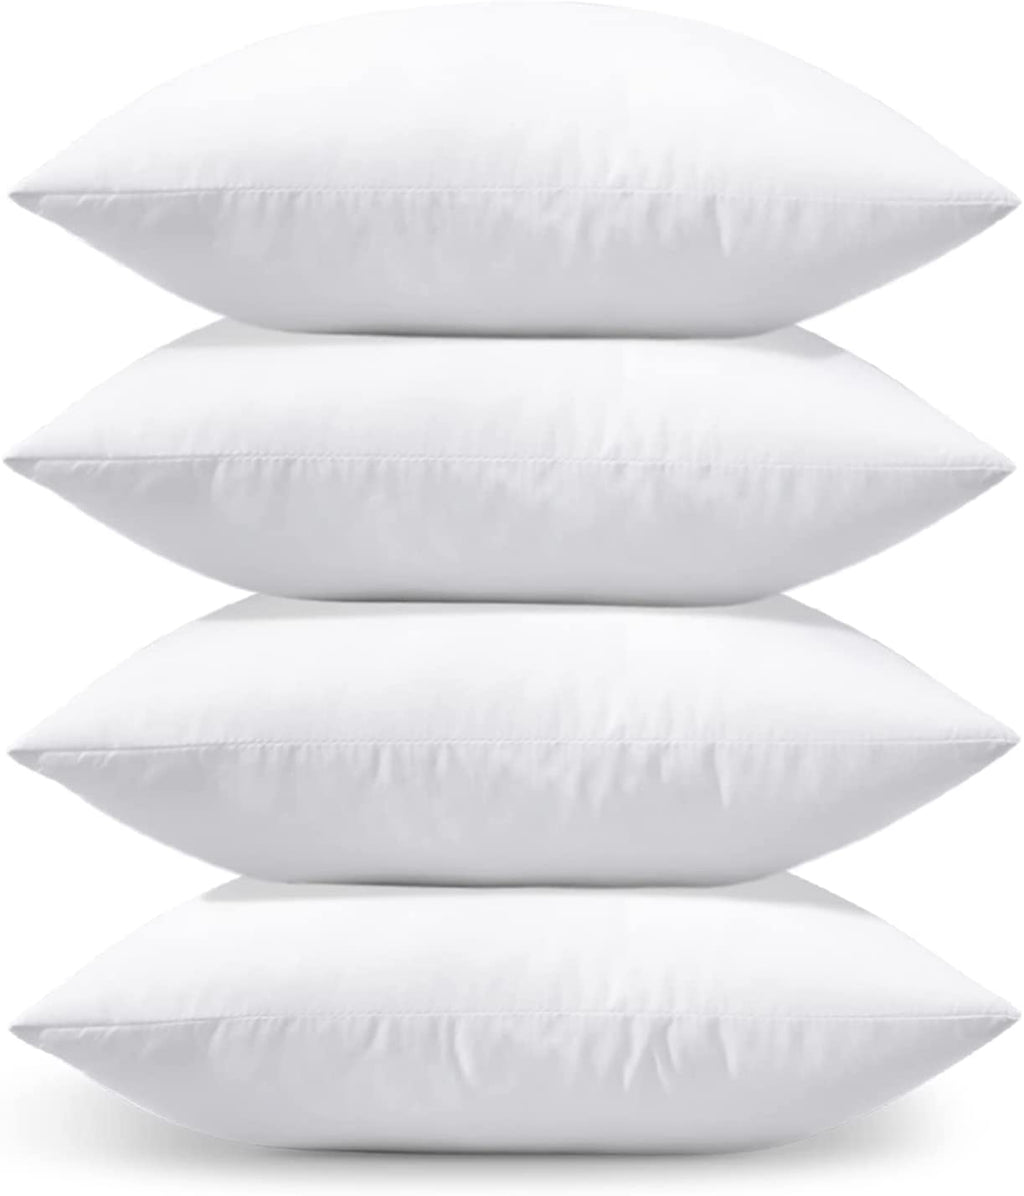 OTOSTAR Pack of 4 Throw Pillow Inserts, 18 x 18 Square Cushion